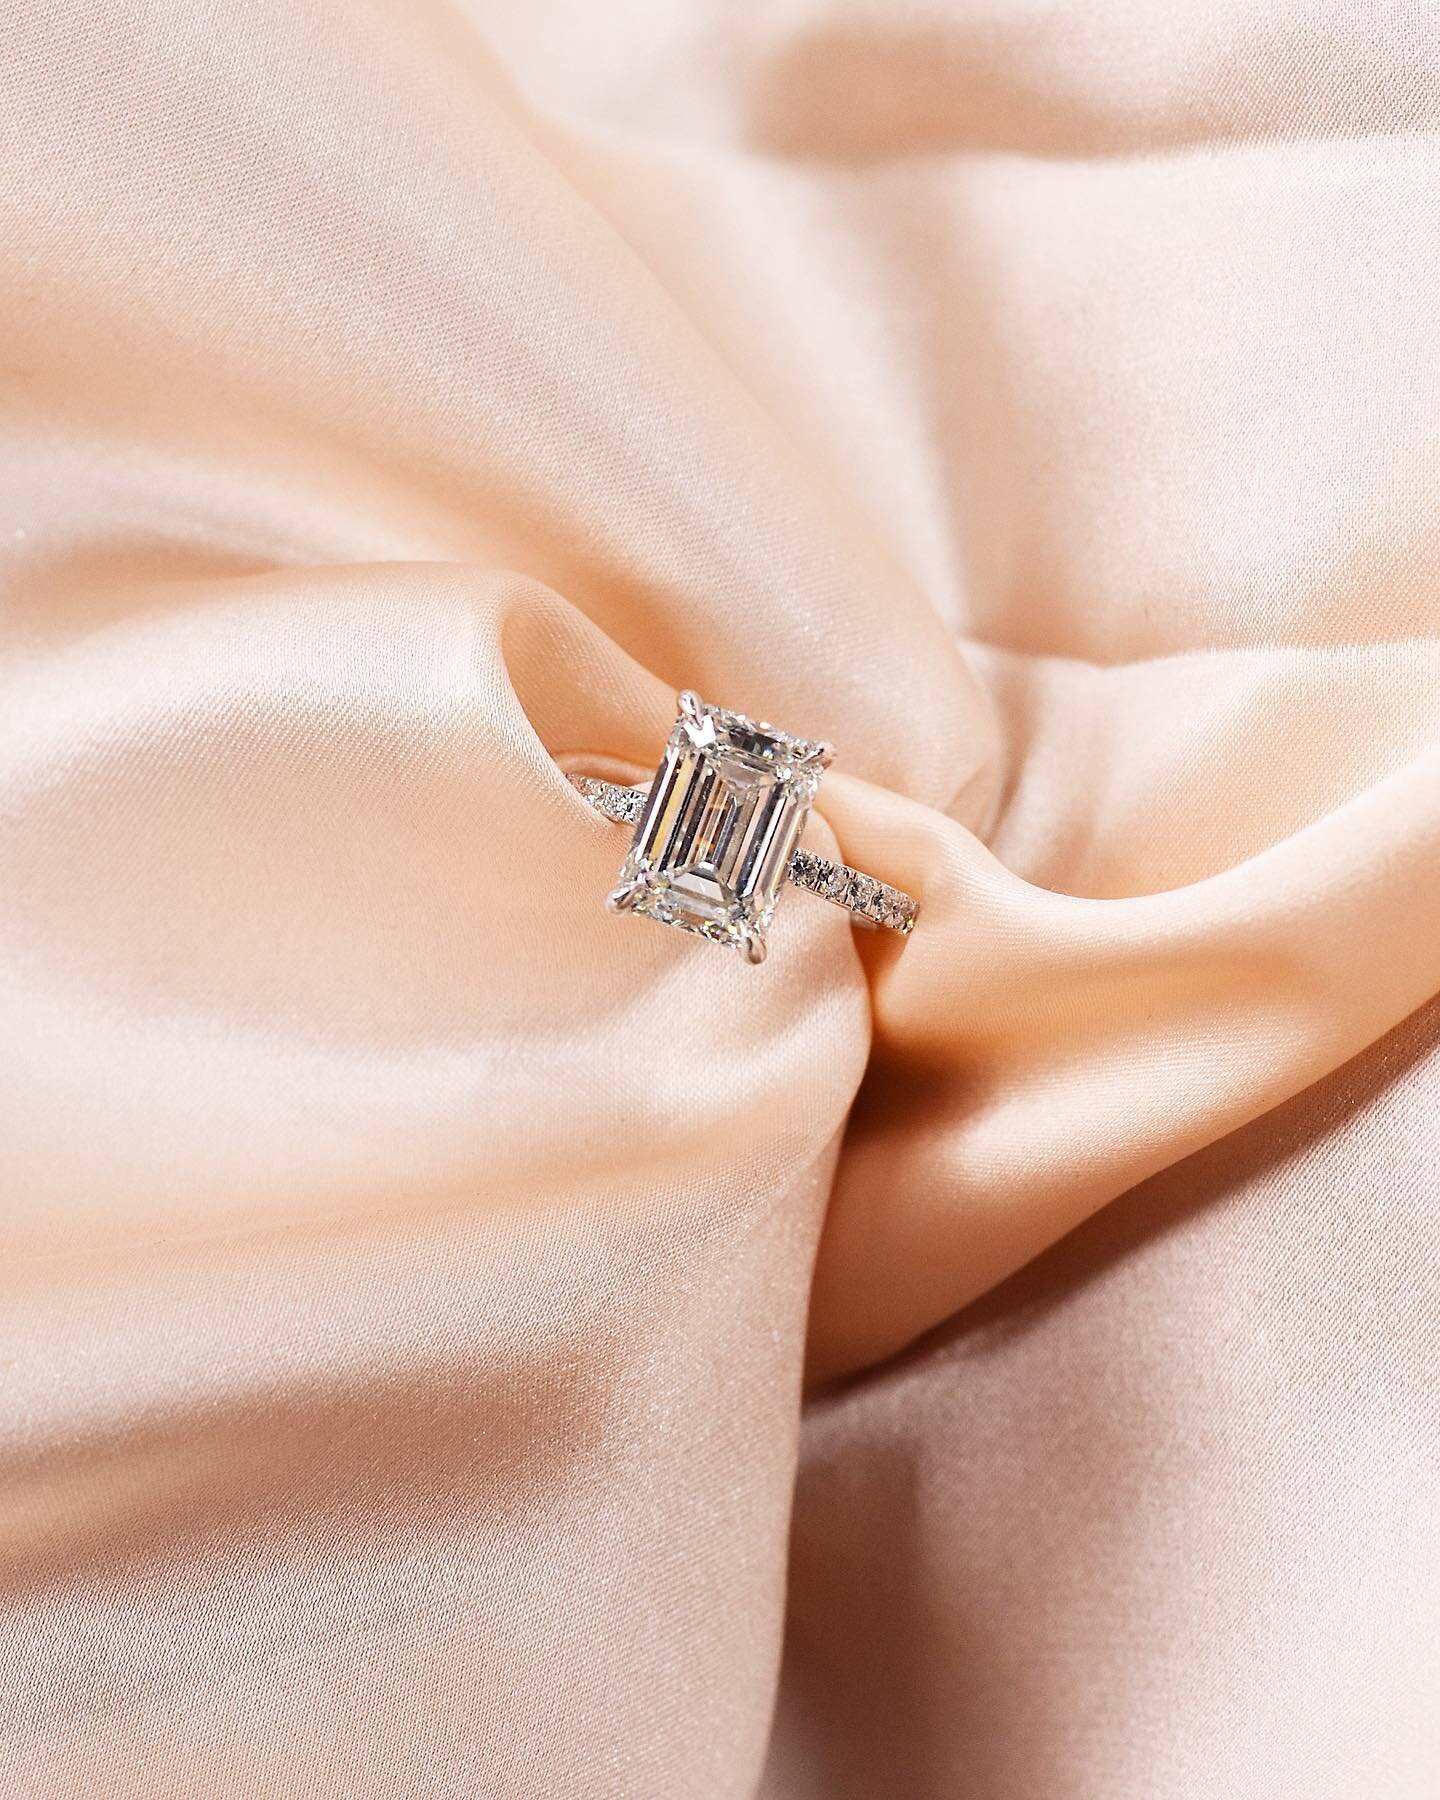 Timeless beauty is what you will get with any elegant emerald cut engagement ring ✨ We are obsessed with this spectacular 4.0 carat emerald cut with hidden halo, how perfect it is?! 😍
.
.
.
.
#emeraldcut #emeraldcutdiamond #emeraldcutengagementring 